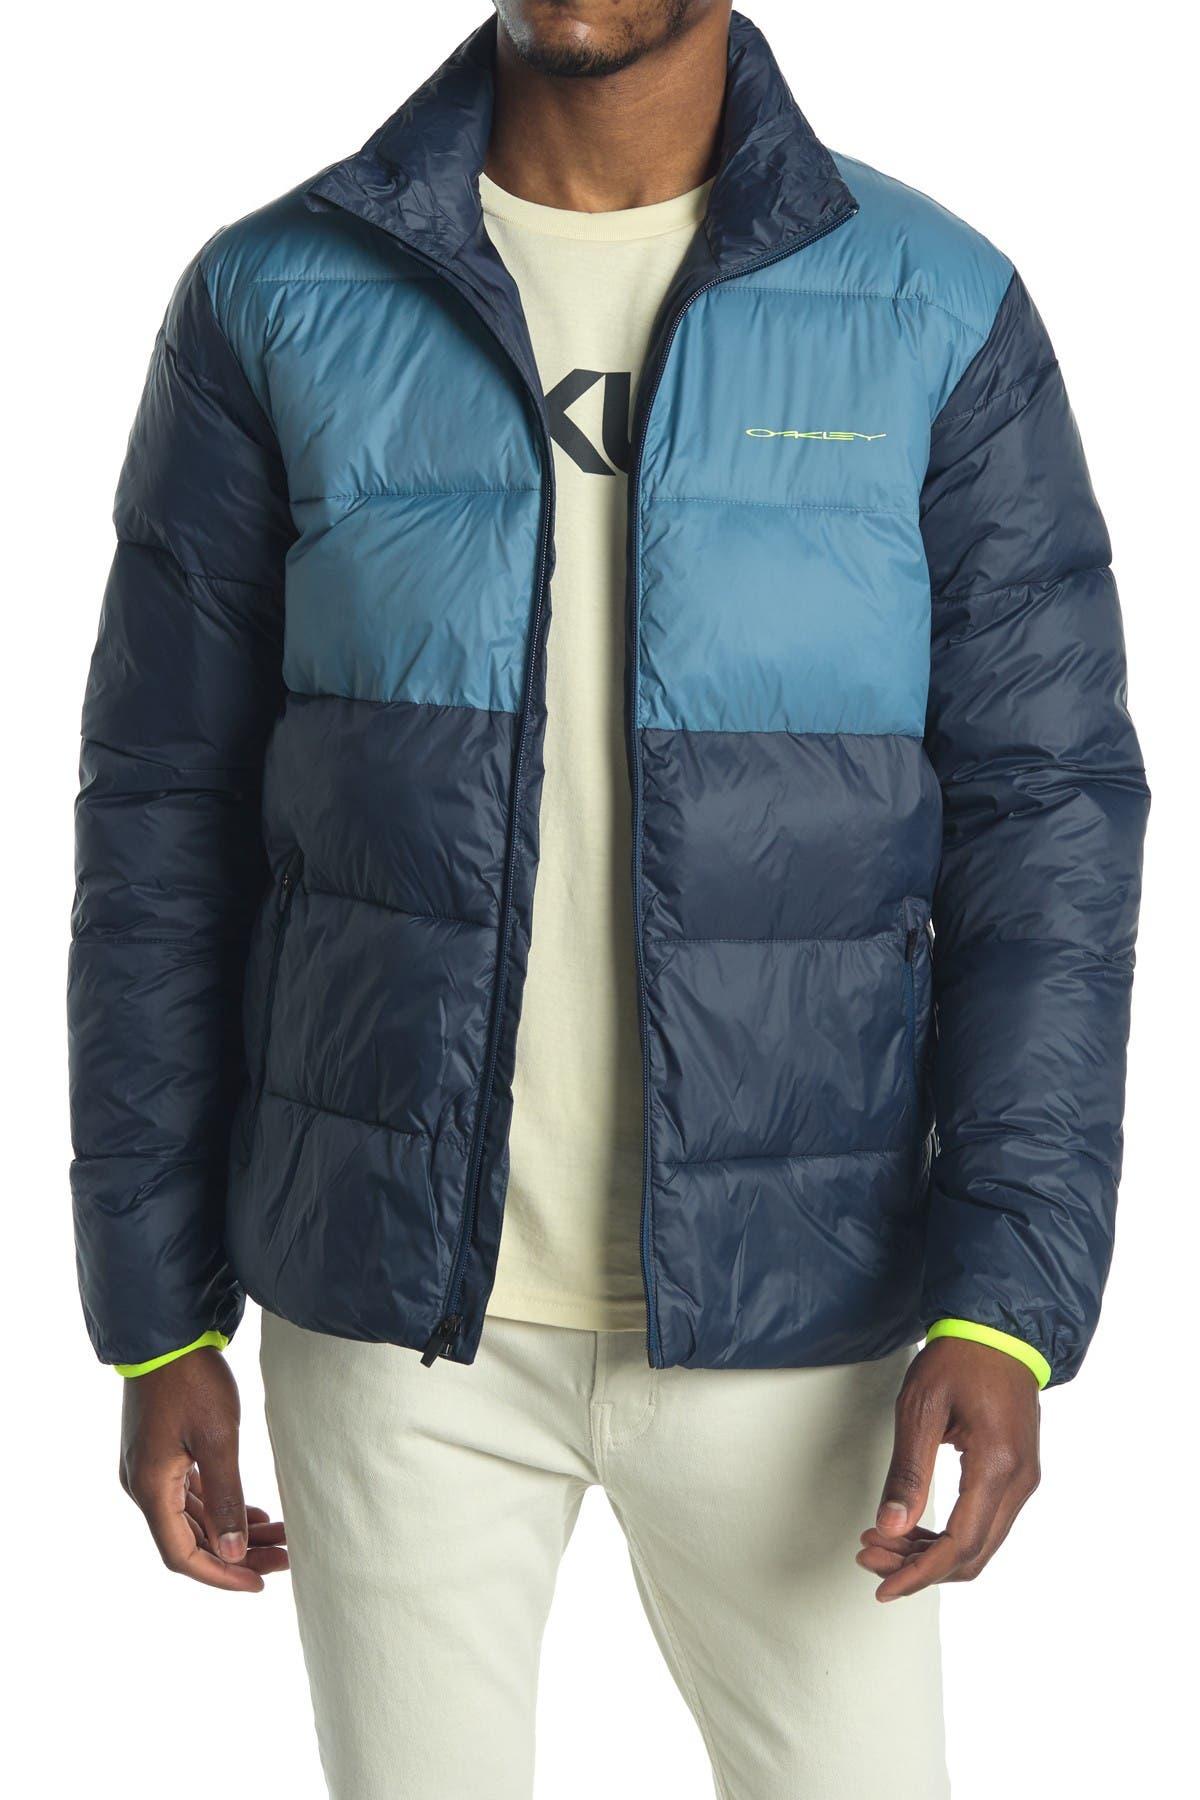 Oakley Synthetic Colorblock Insulated Puffer Jacket in Blue for Men - Lyst